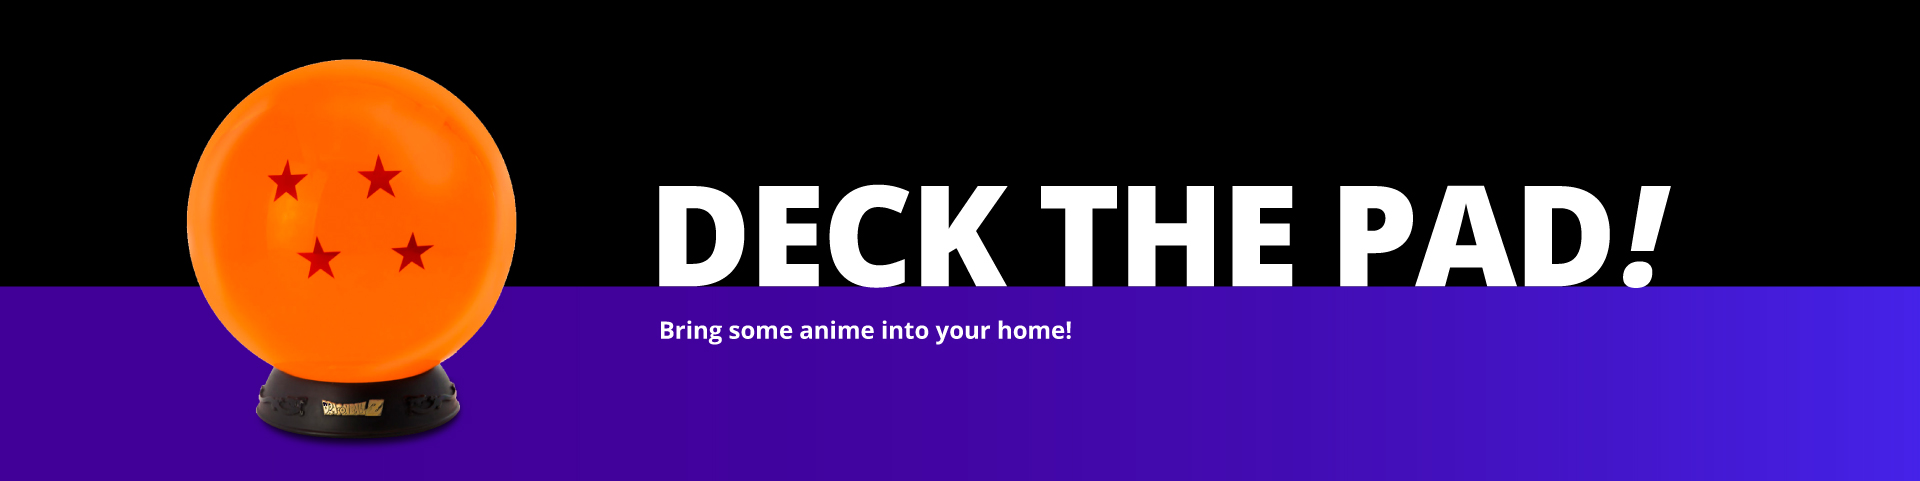 Deck The Pad! Bring some anime into your home!